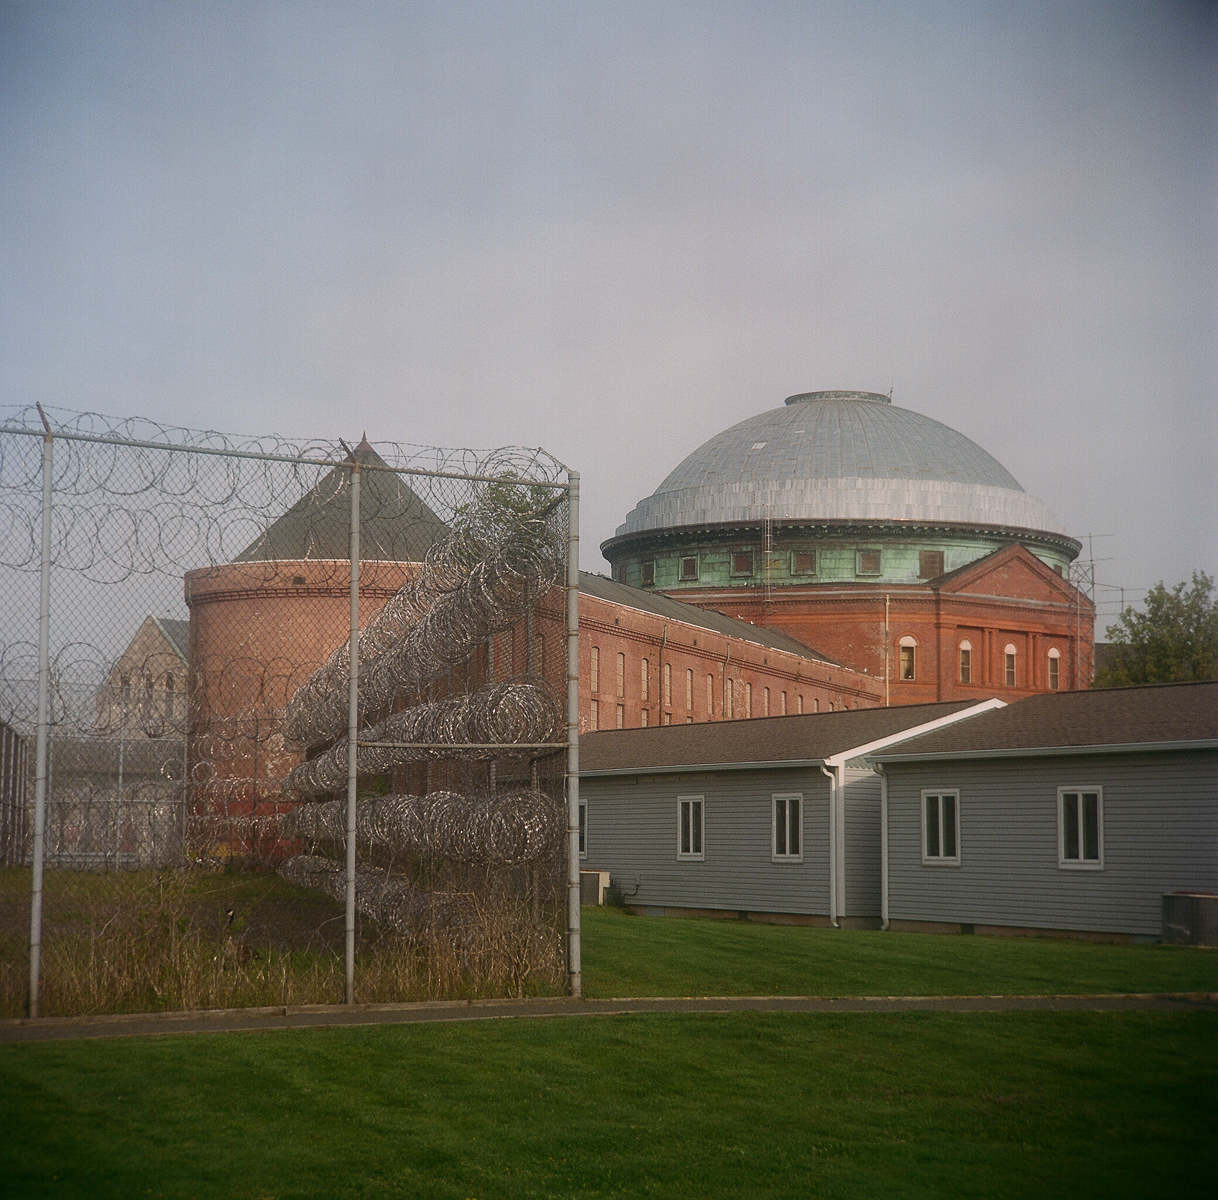 East Jersey State Prison